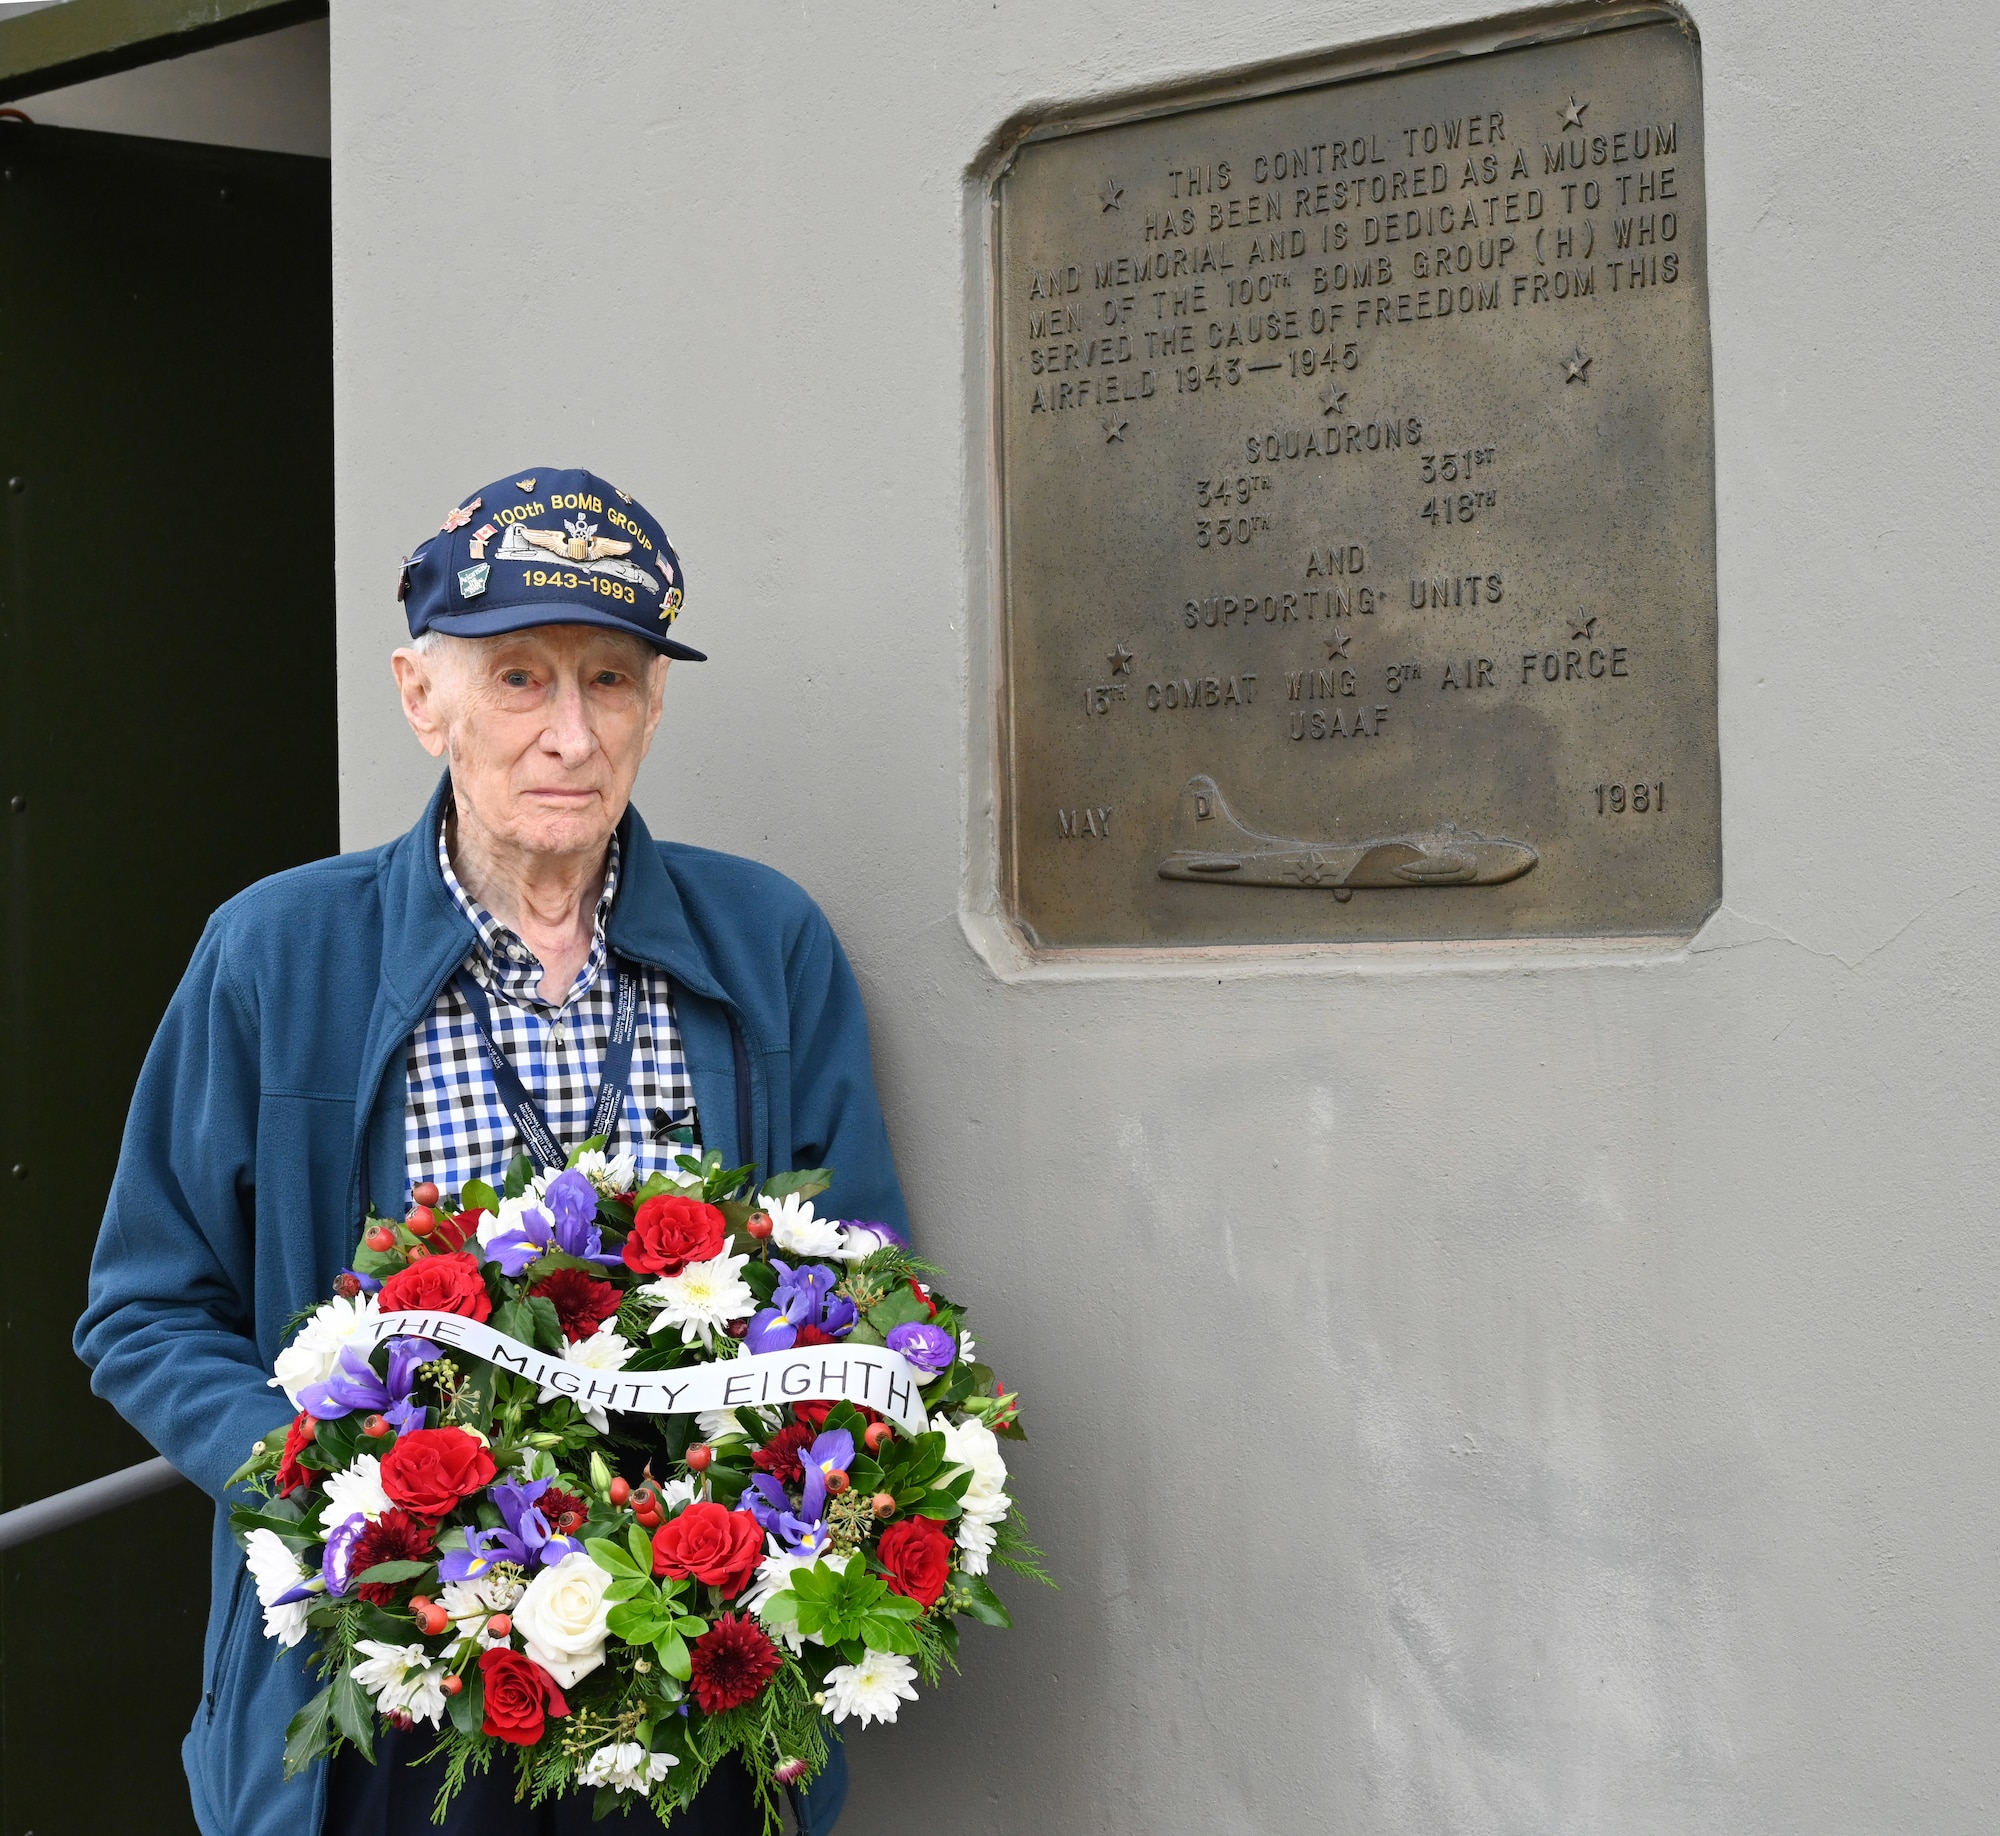 U.S. Army Air Force retired-Maj. John “Lucky” Luckadoo, legendary World War II B-17 pilot and 100th Bomb Group veteran, prepares to lay a wreath in honor of his former friends and comrades who paid the ultimate sacrifice during World War II, near plaques on the wall of the control tower during a ceremony honoring the 80th anniversary of “Black Week” at the 100th BG Memorial Museum at Thorpe Abbotts, Norfolk, England, Oct. 10, 2023. During “Black Week,” the Mighty Eighth lost 138 heavy bombers, 24 fighters and more than 1,400 Airmen to enemy action. The 100th BG itself suffered the tragic loss of 12 aircraft and 121 crew members over Germany. (U.S. Air Force photo by Karen Abeyasekere)